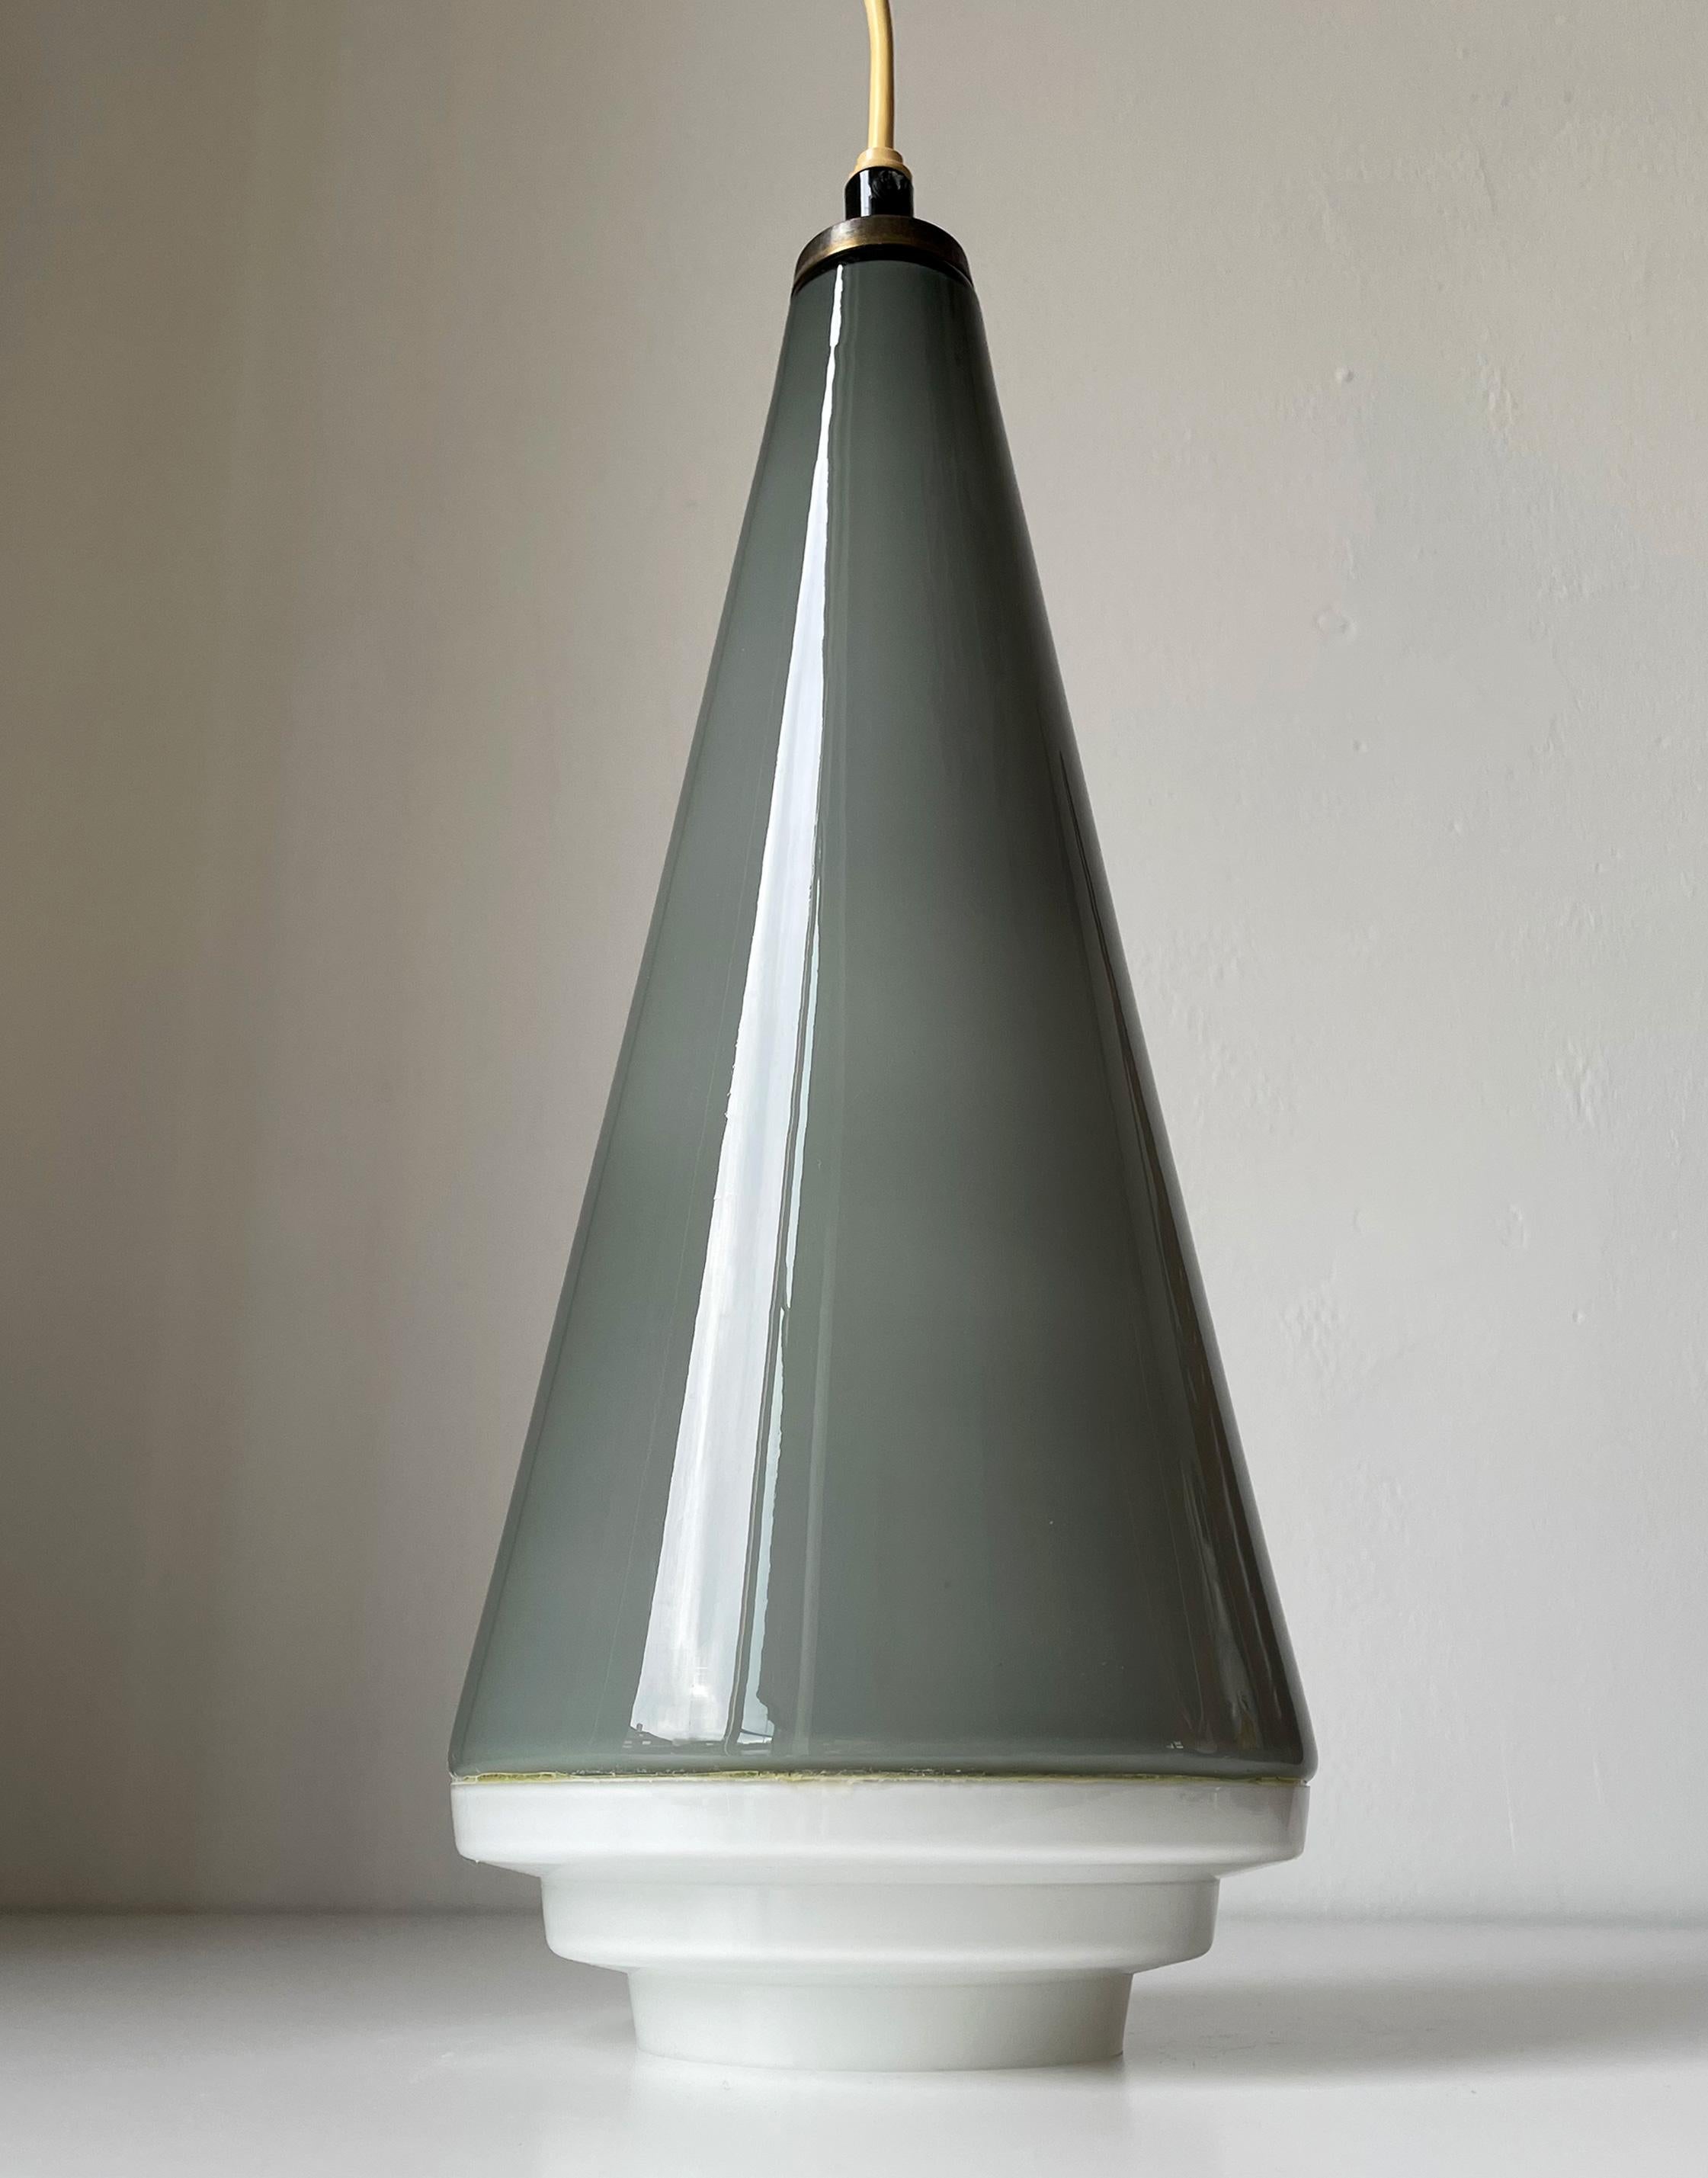 1950s European Mid-Century Modern tapered glass ceiling light. Large cone shaped warm smokey grey over white glass pendant with white tiered Art Deco style glass base. Original fitting for E27 bulb. Rewiring upon request. Beautiful vintage